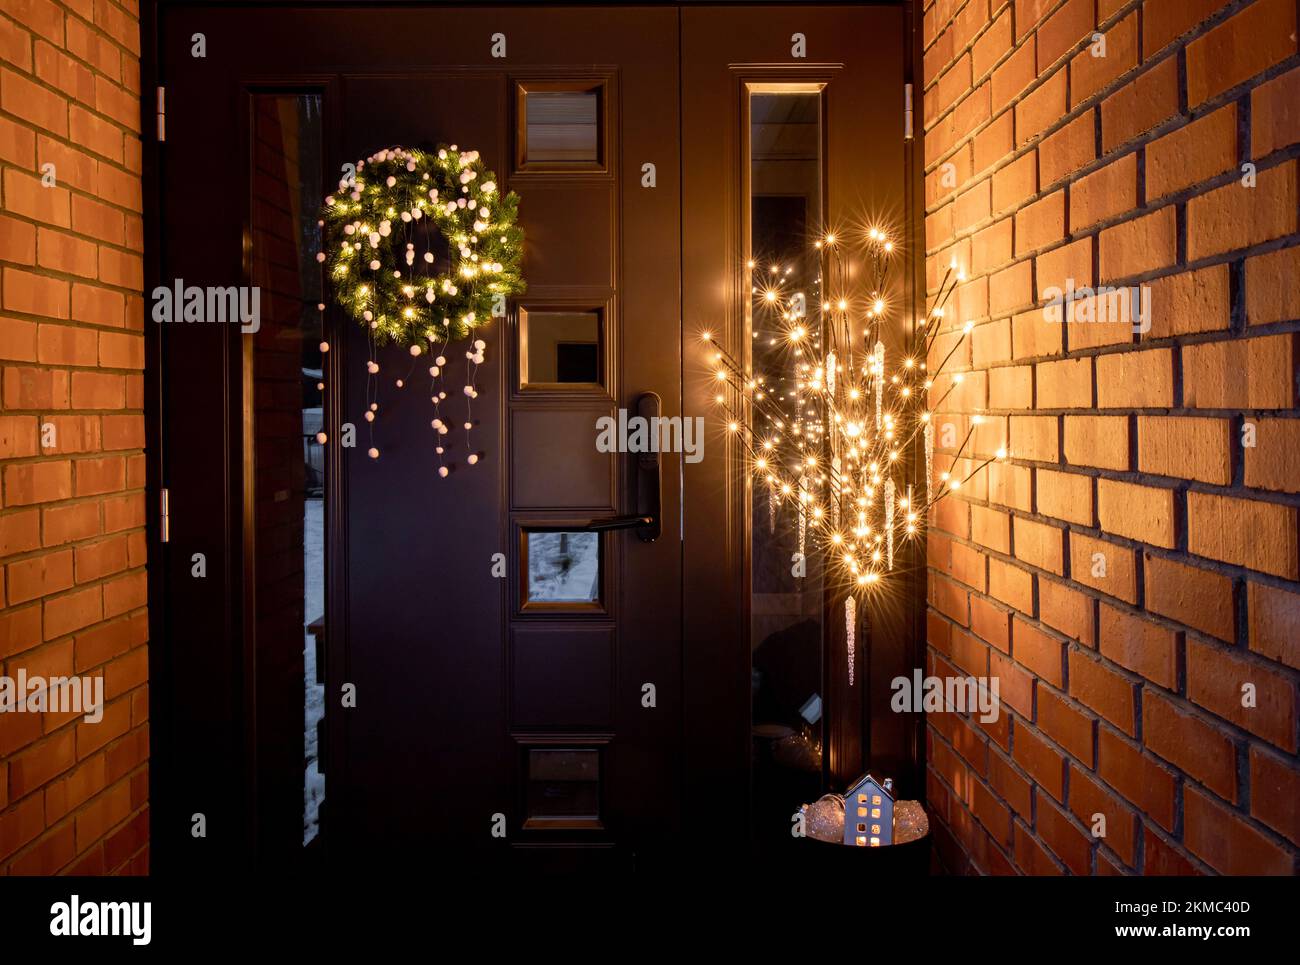 Home door entrance outdoors with various Christmas decorations Christmas wreath with pom poms and flower pot with artificial tree with lights. Stock Photo